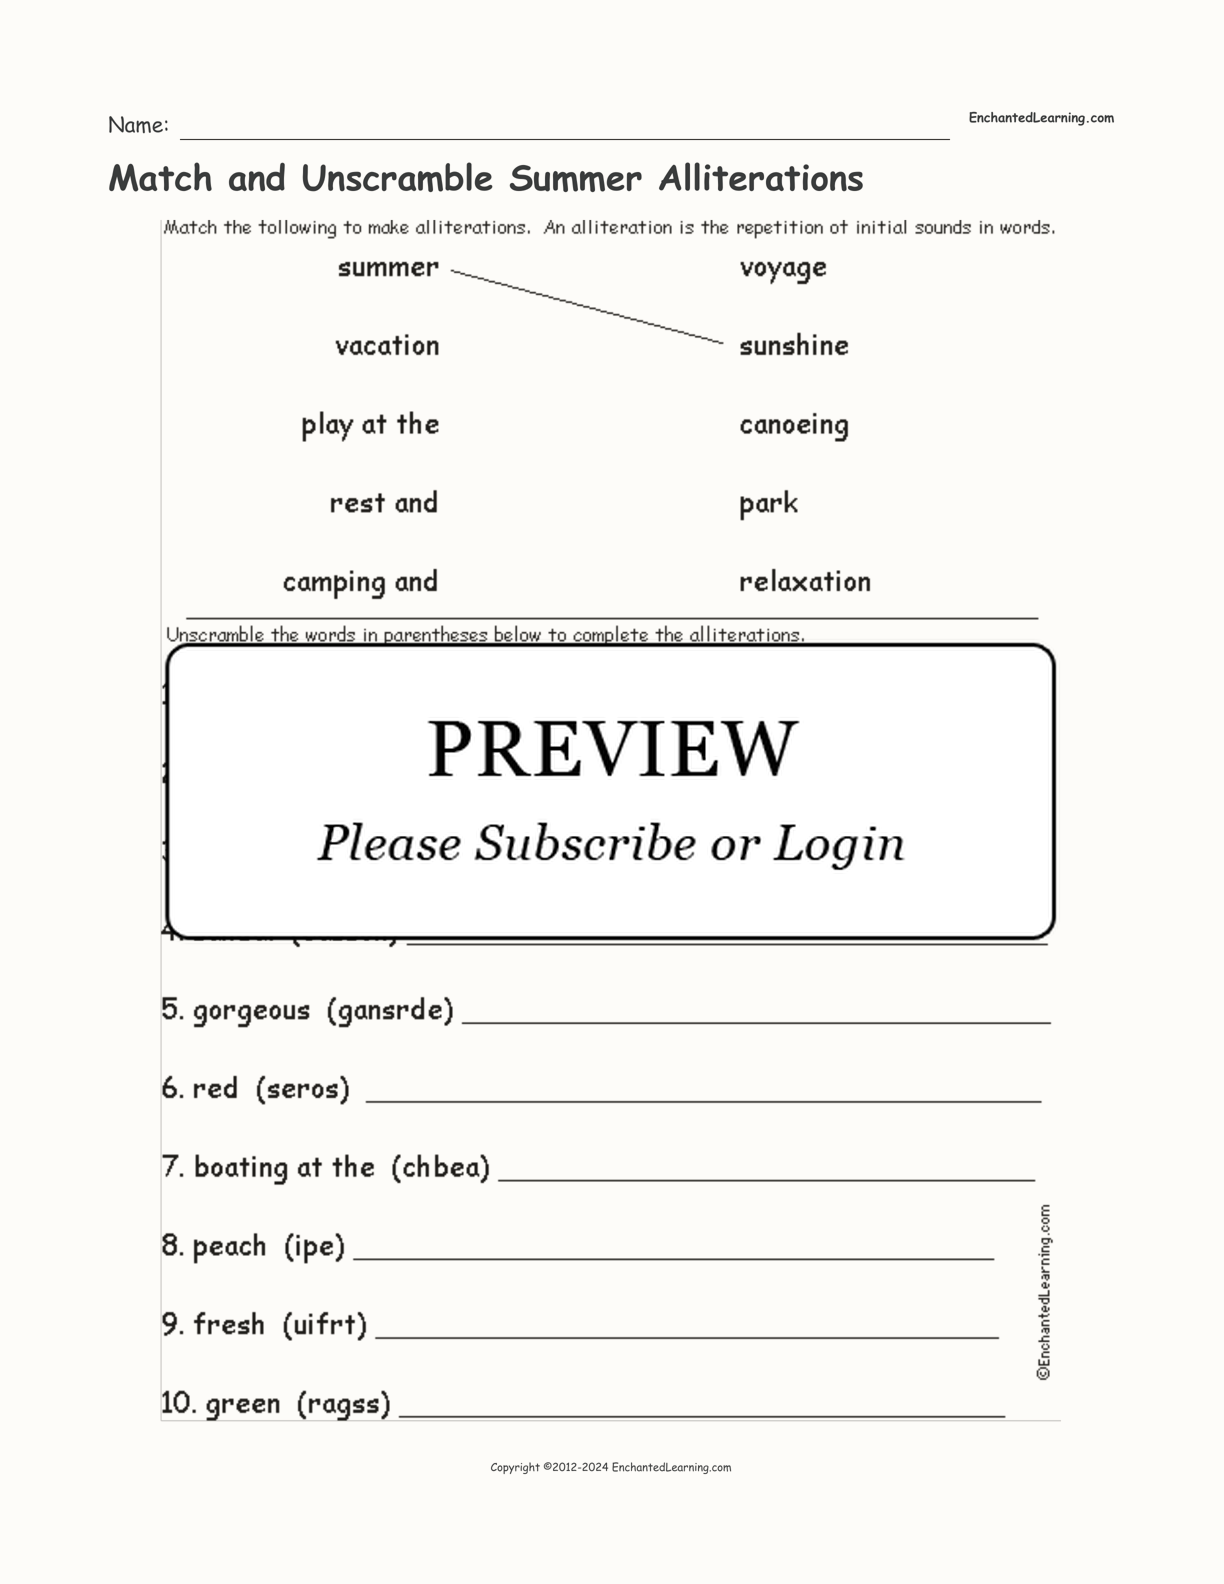 Match and Unscramble Summer Alliterations interactive worksheet page 1